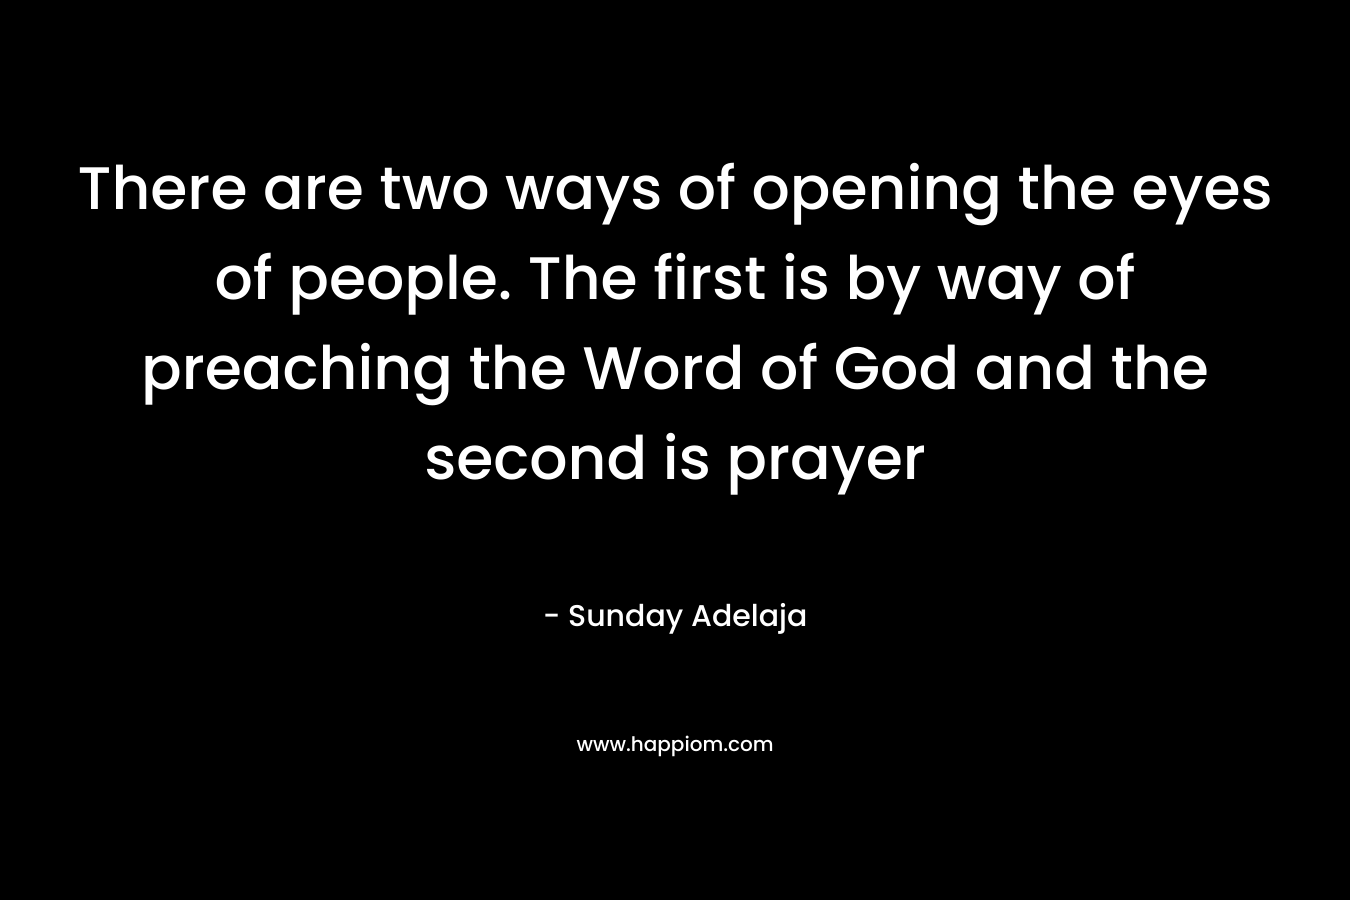 There are two ways of opening the eyes of people. The first is by way of preaching the Word of God and the second is prayer